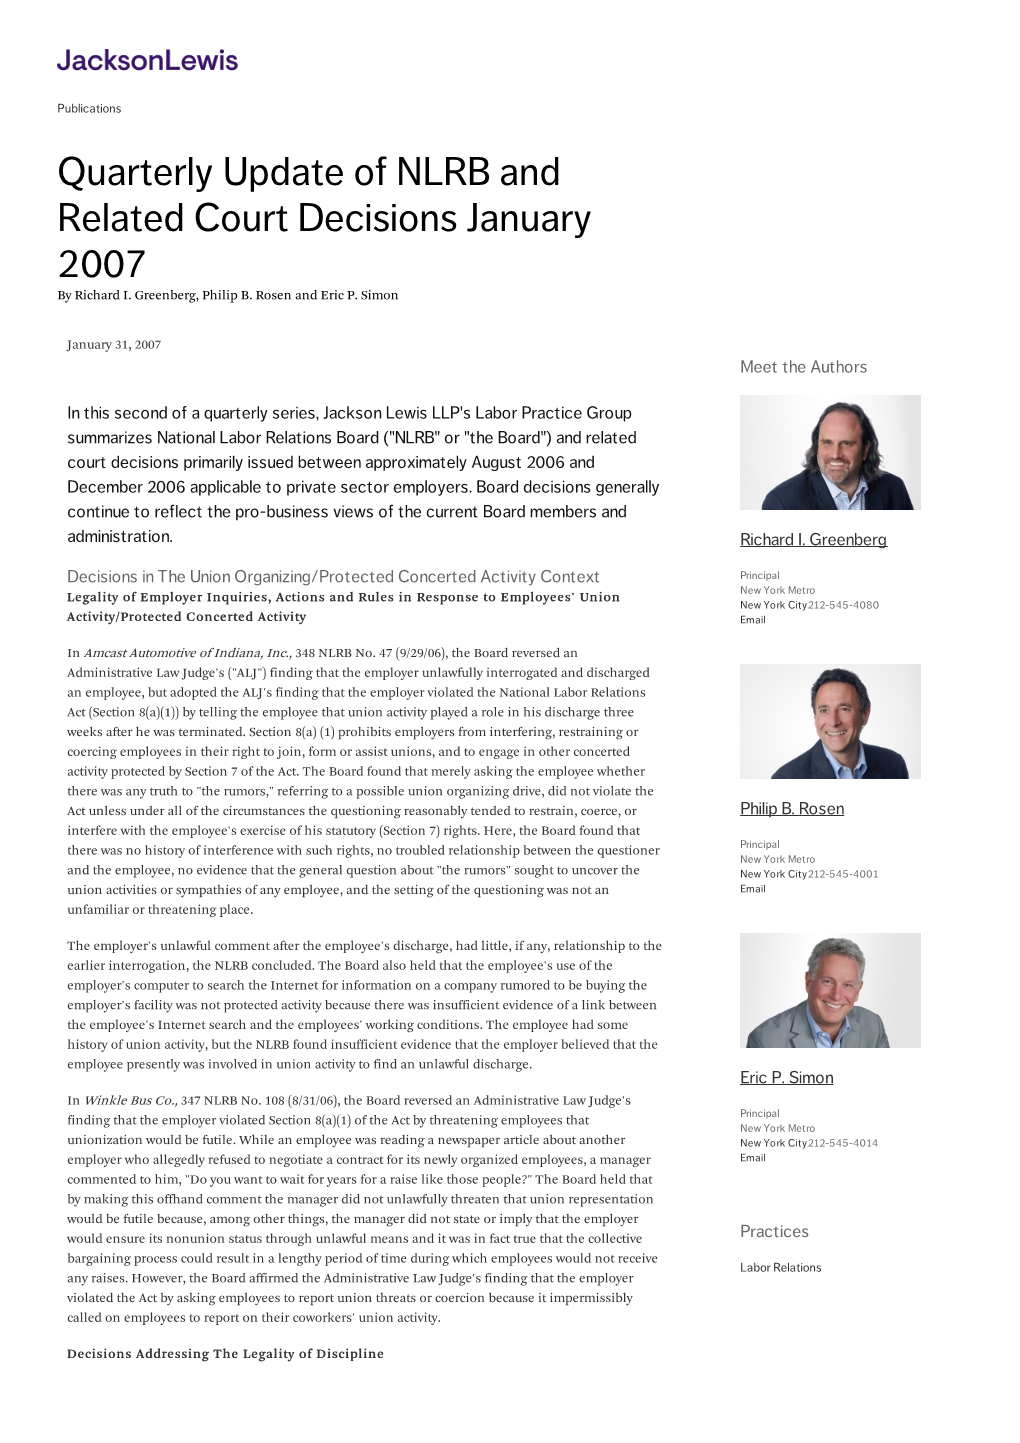 Quarterly Update of NLRB and Related Court Decisions January 2007 by Richard I